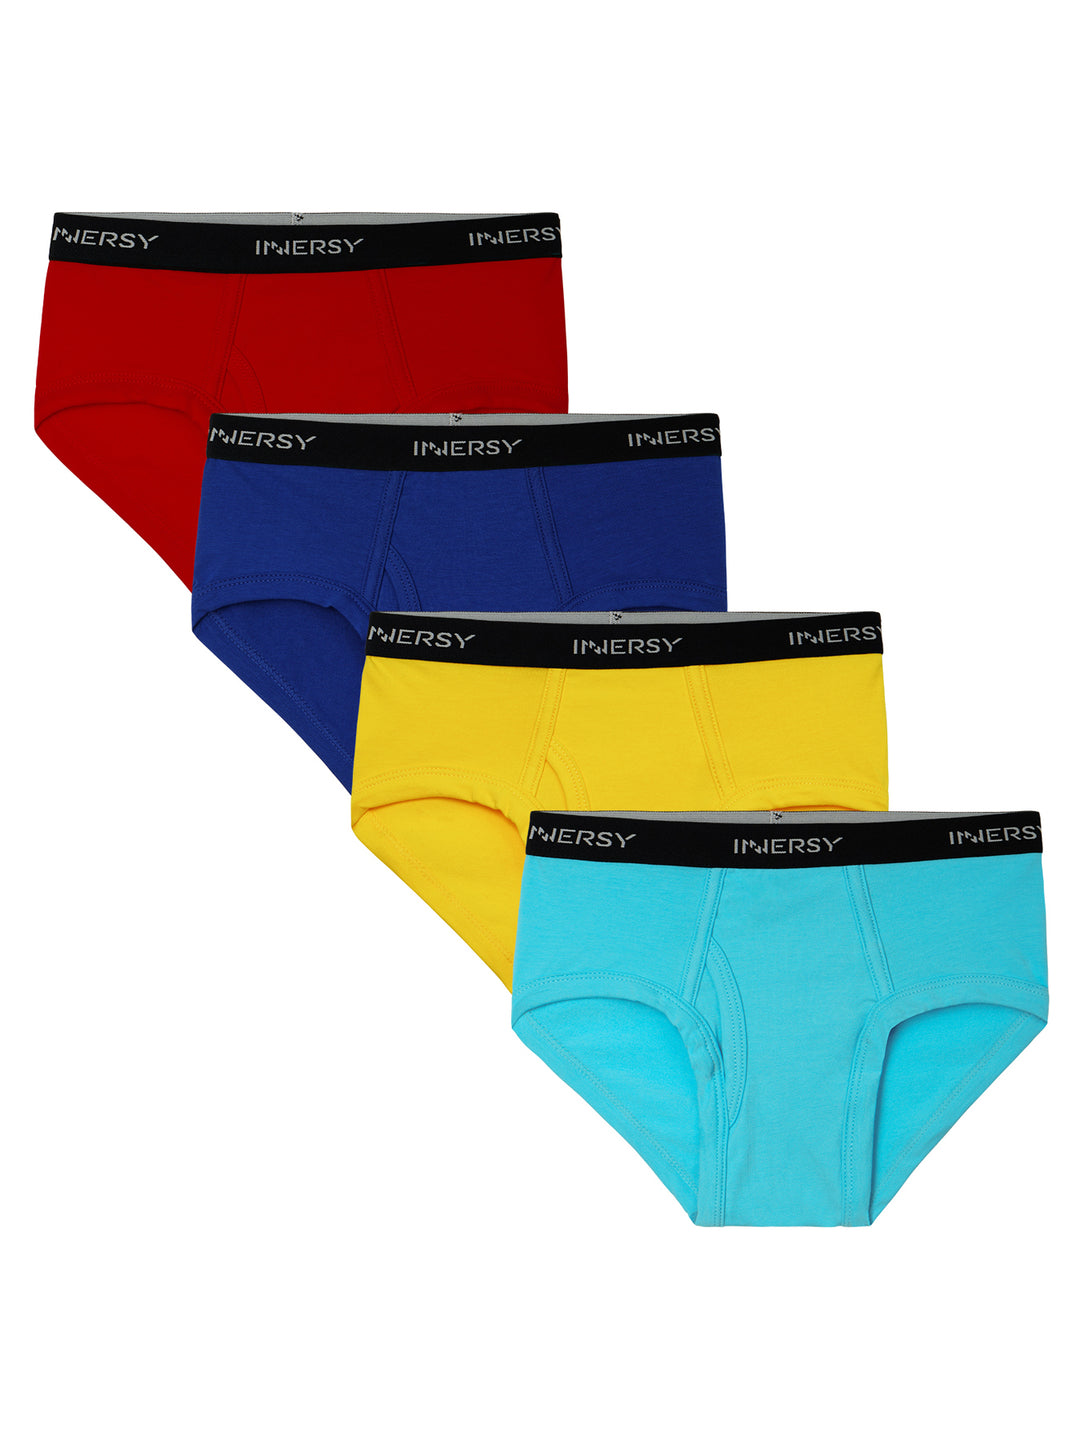 INNERSY Mens Briefs Breathable Cotton Underwear for Men 4 Pack